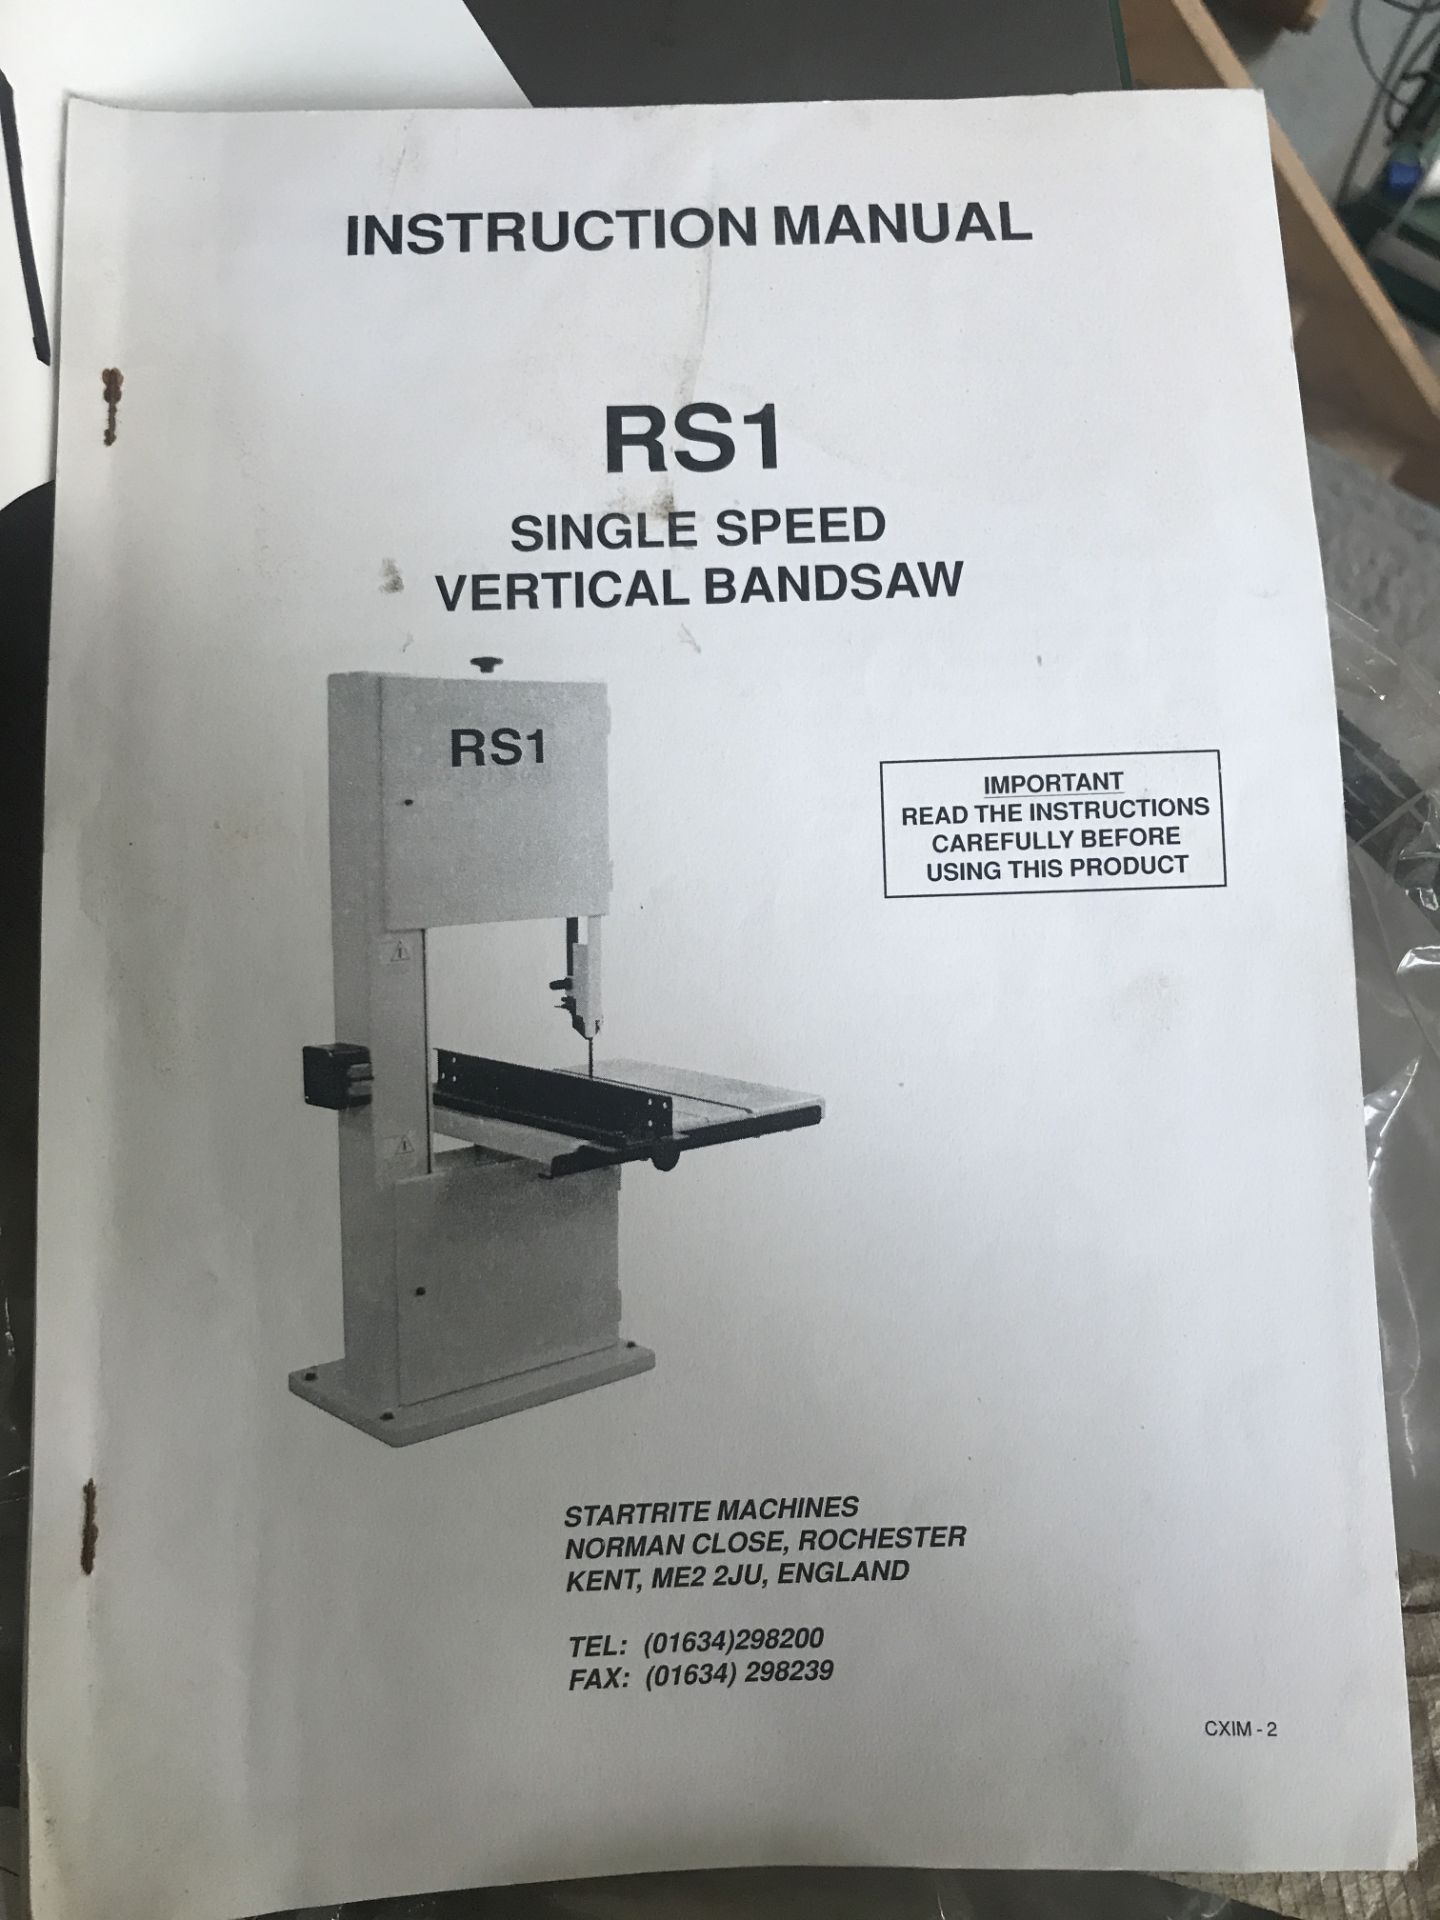 Startrite R51 Vertical Bandsaw, serial no. 202097, year of manufacture 1999, single phase, with - Bild 7 aus 9